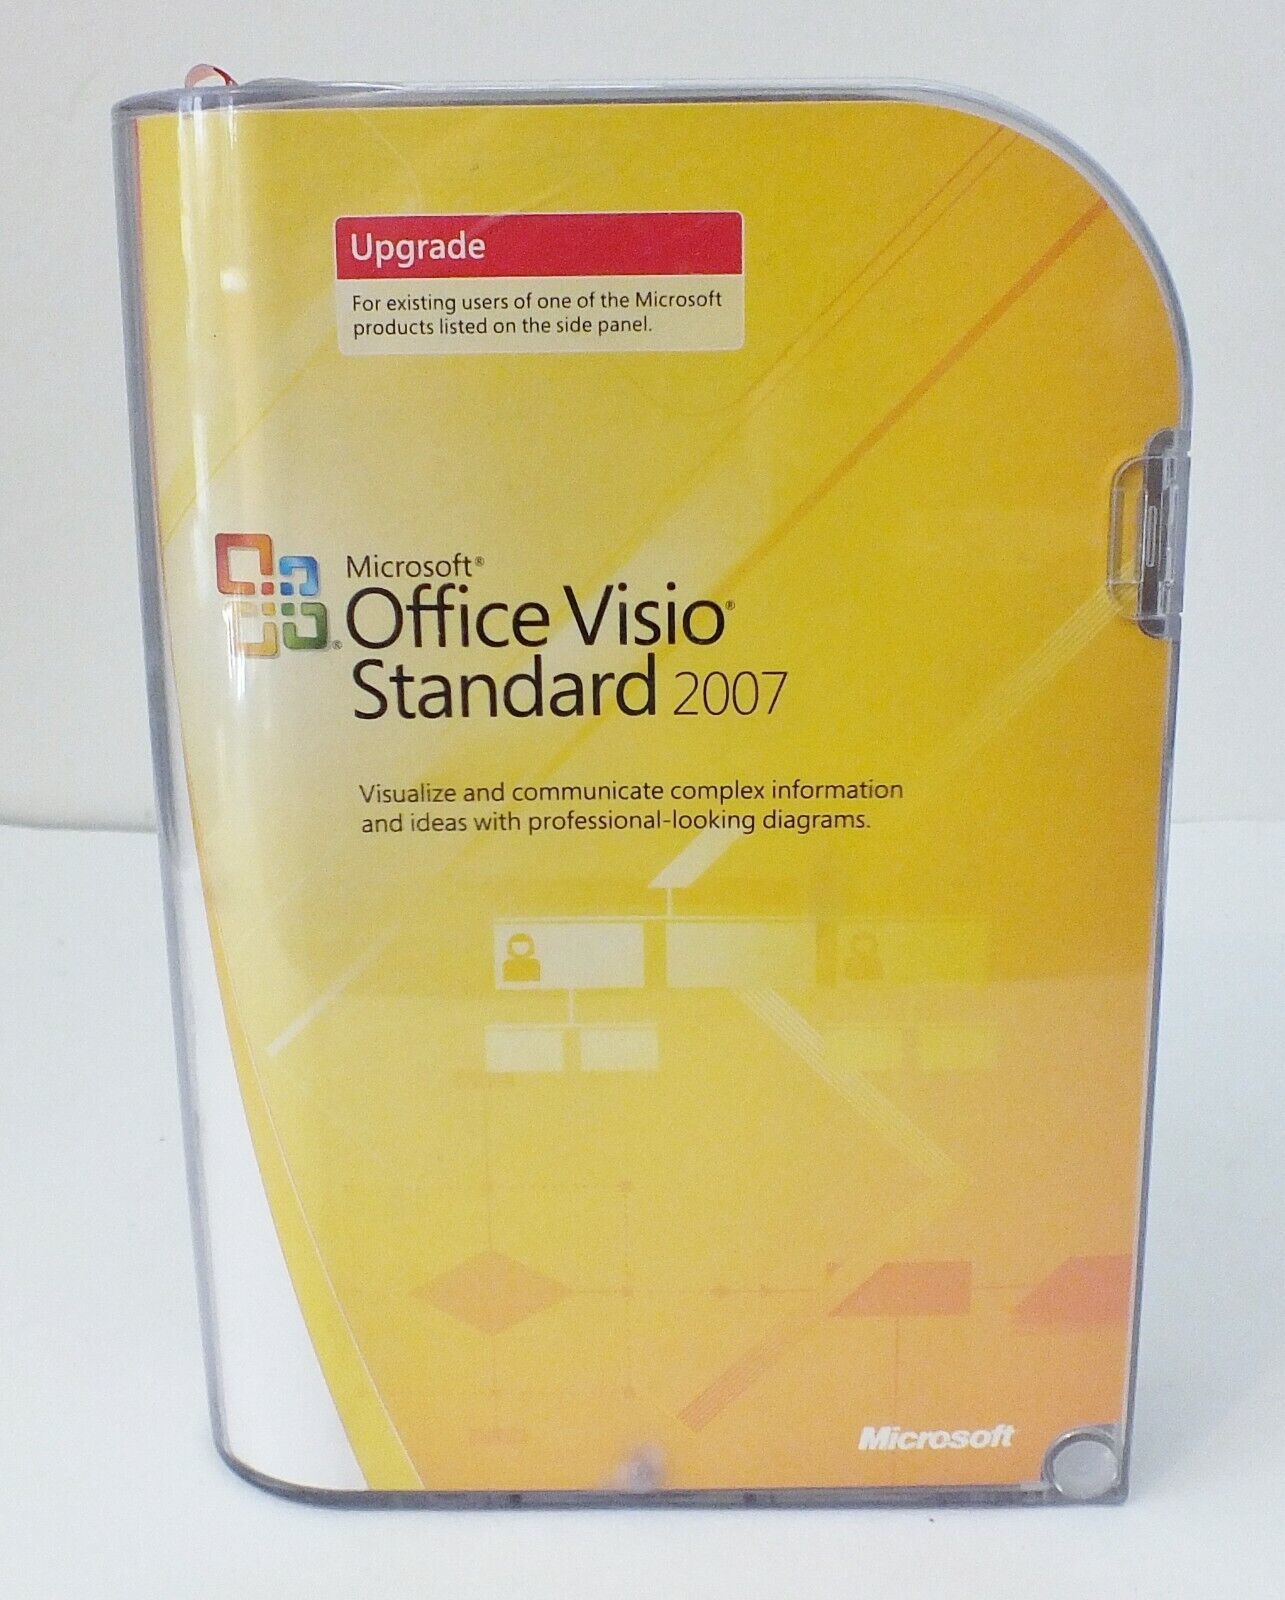 Microsoft Office Visio Standard 2007 Full Version RETAIL Upgrade for existing - $16.83